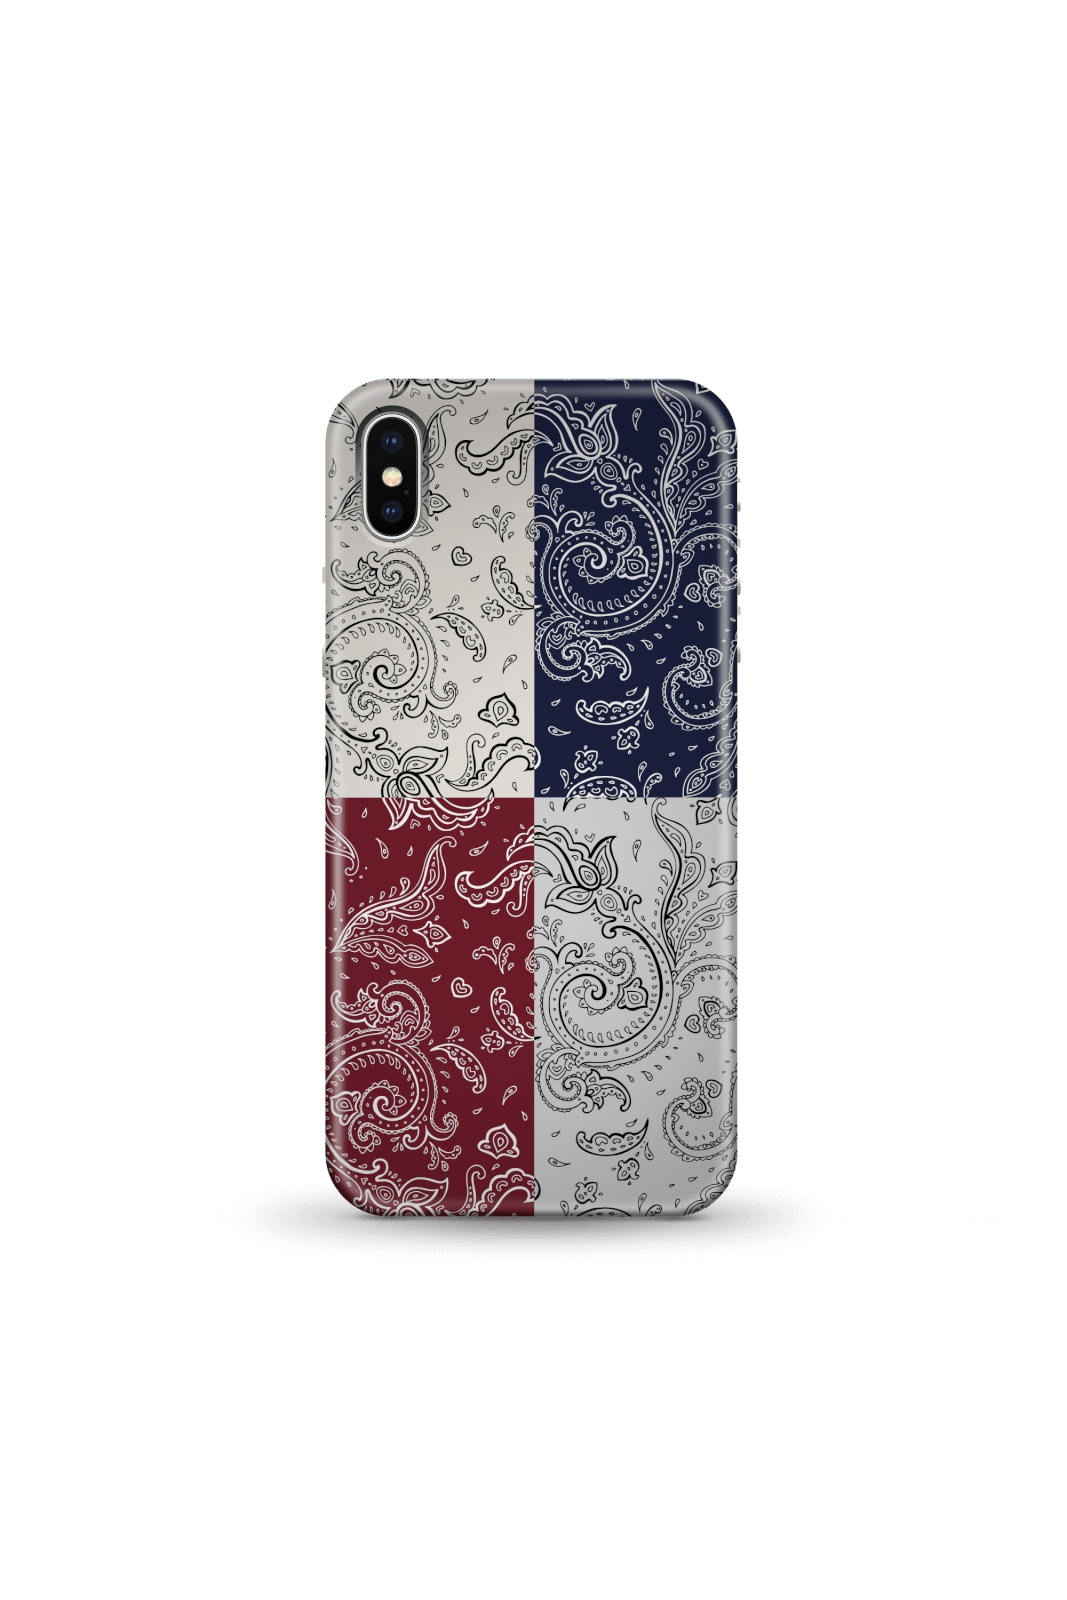 Split Paisley Phone Case for iPhone and Android - iPhone 5/5s - Snap Case - Matte